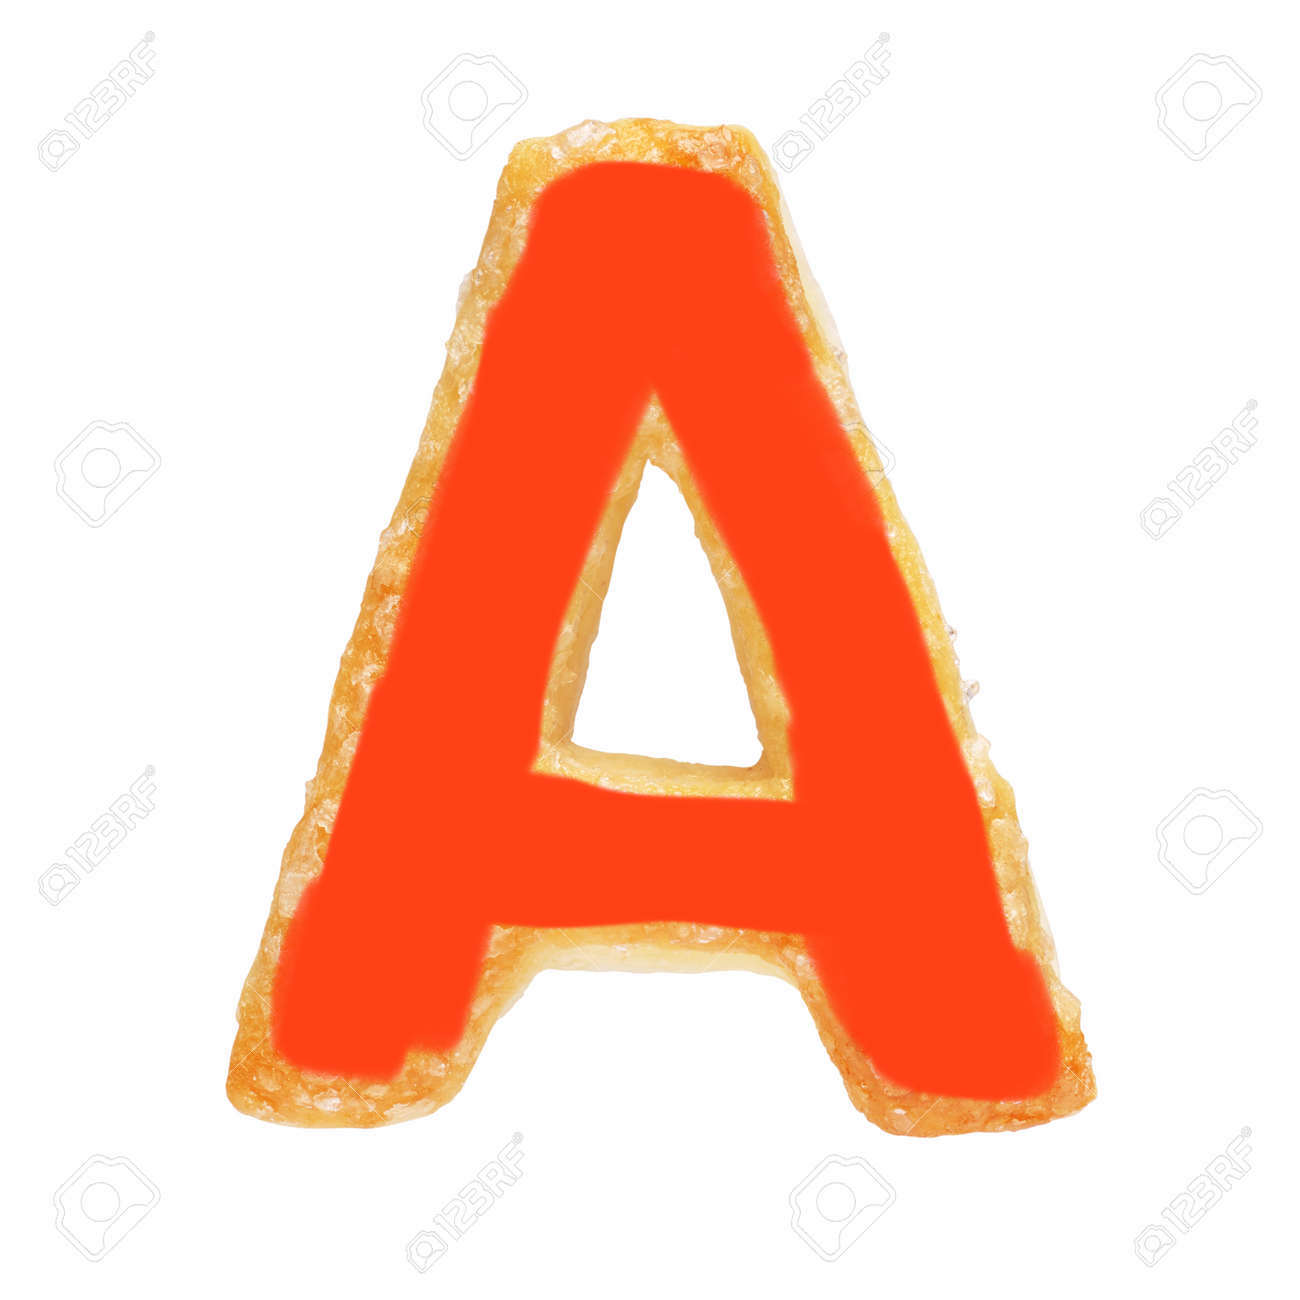  Letter A From Baked Dough অথবা Cookie